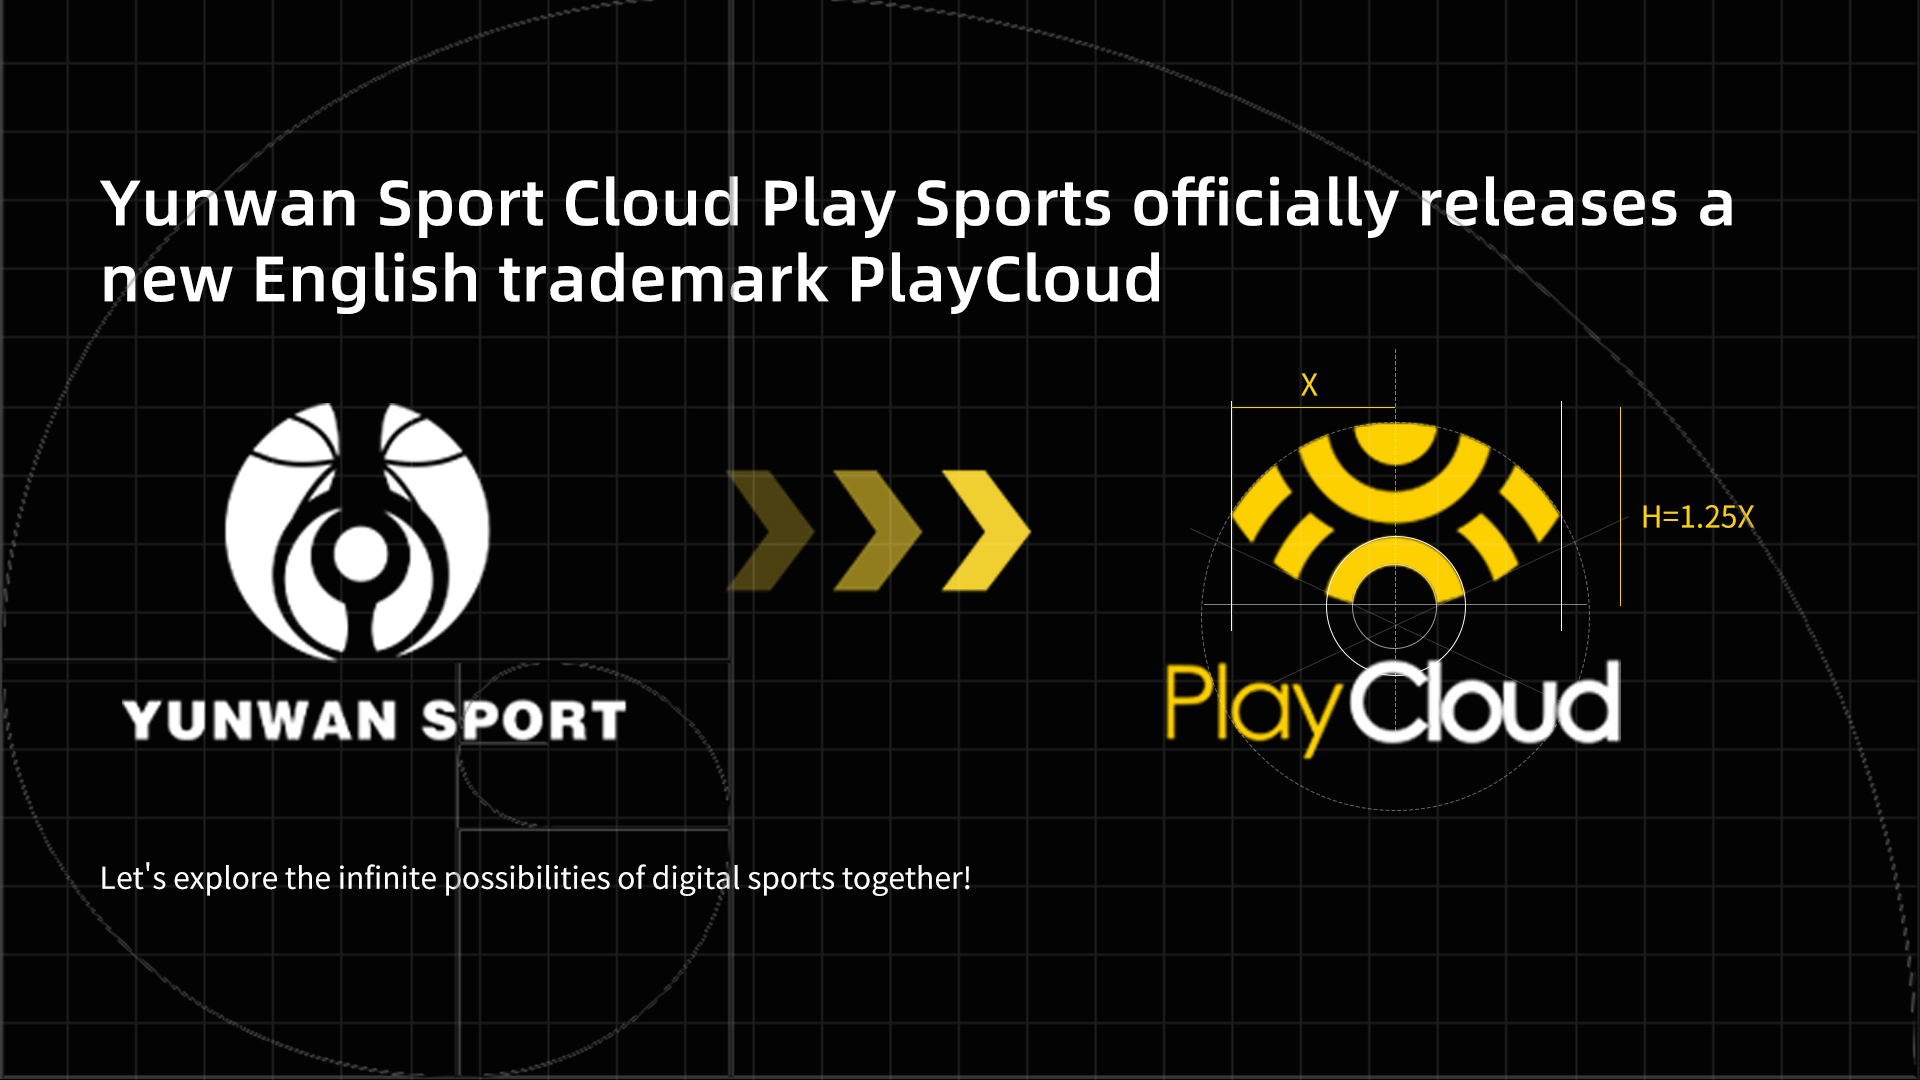 Yunwan Sport officially unveils its new English trademark — PlayCloud.